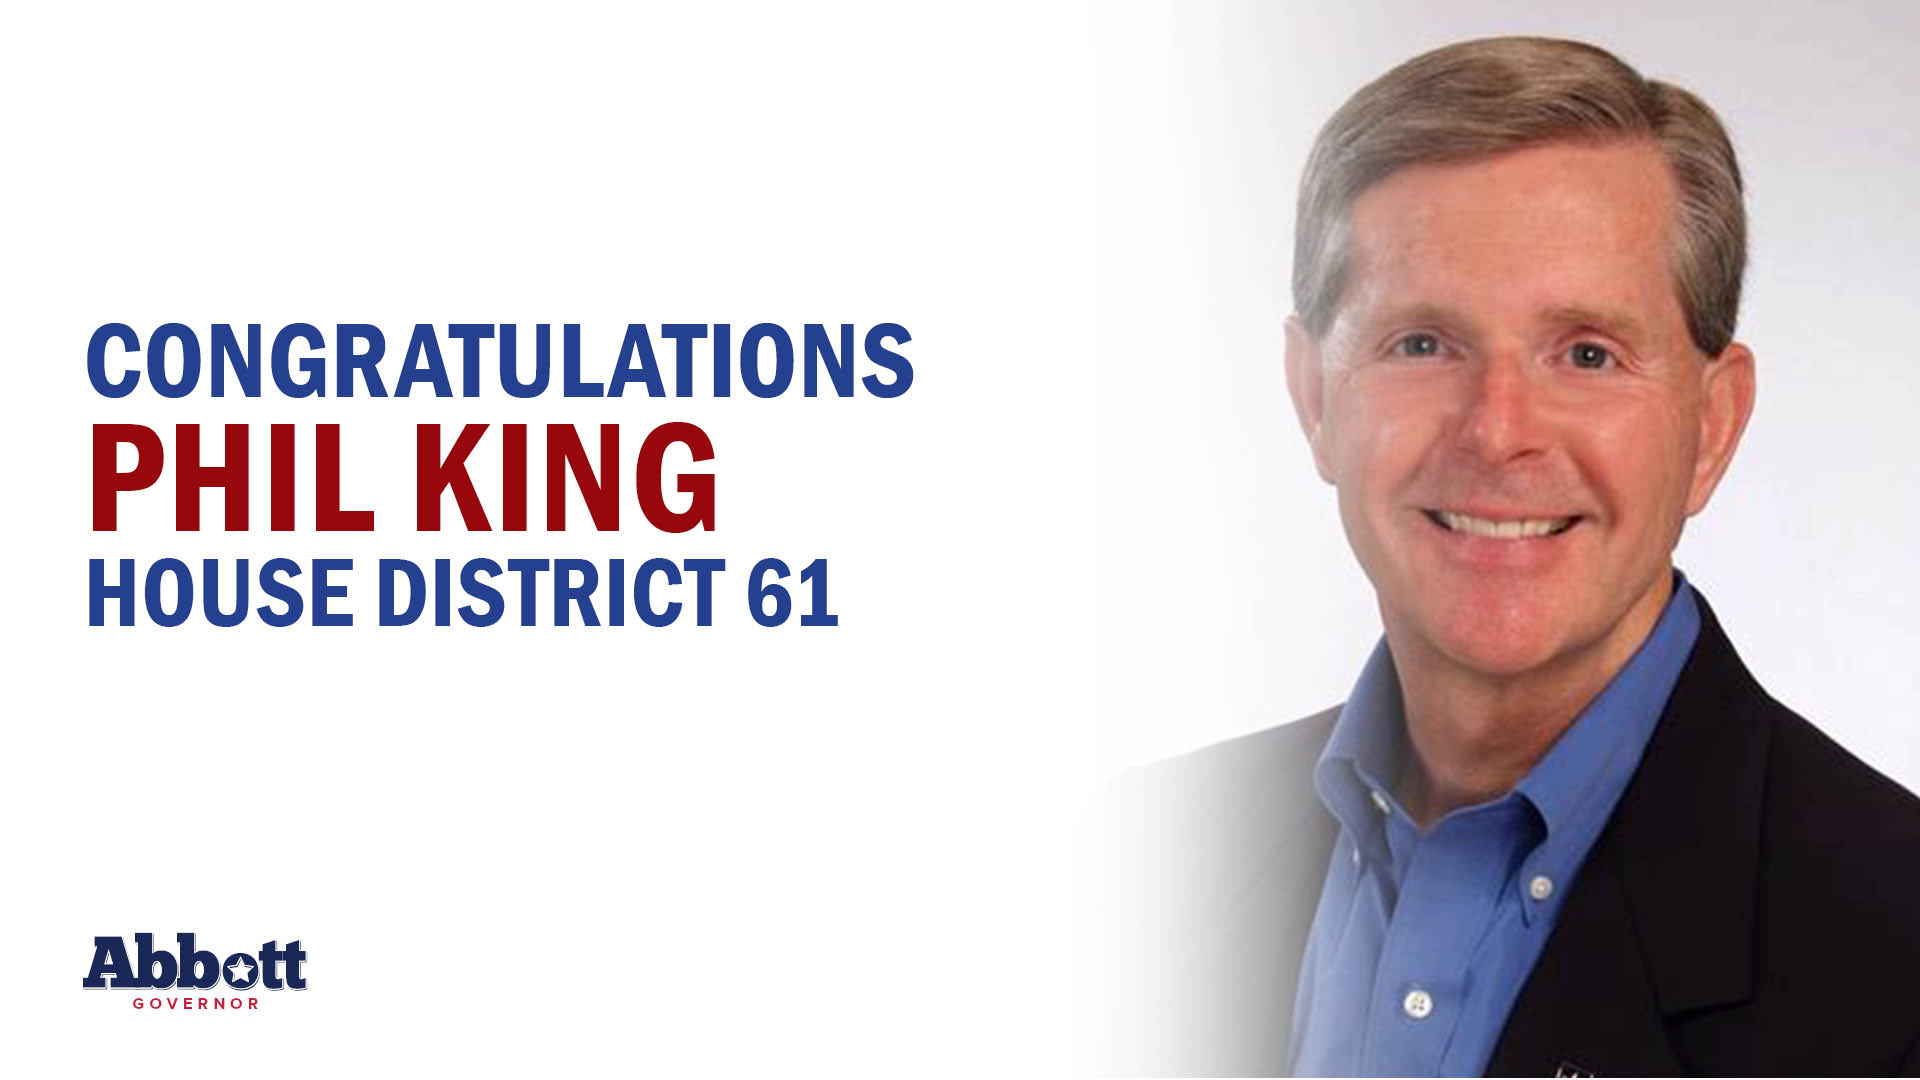 Governor Abbott Issues Statement On Representative Phil King’s Re-Election Win